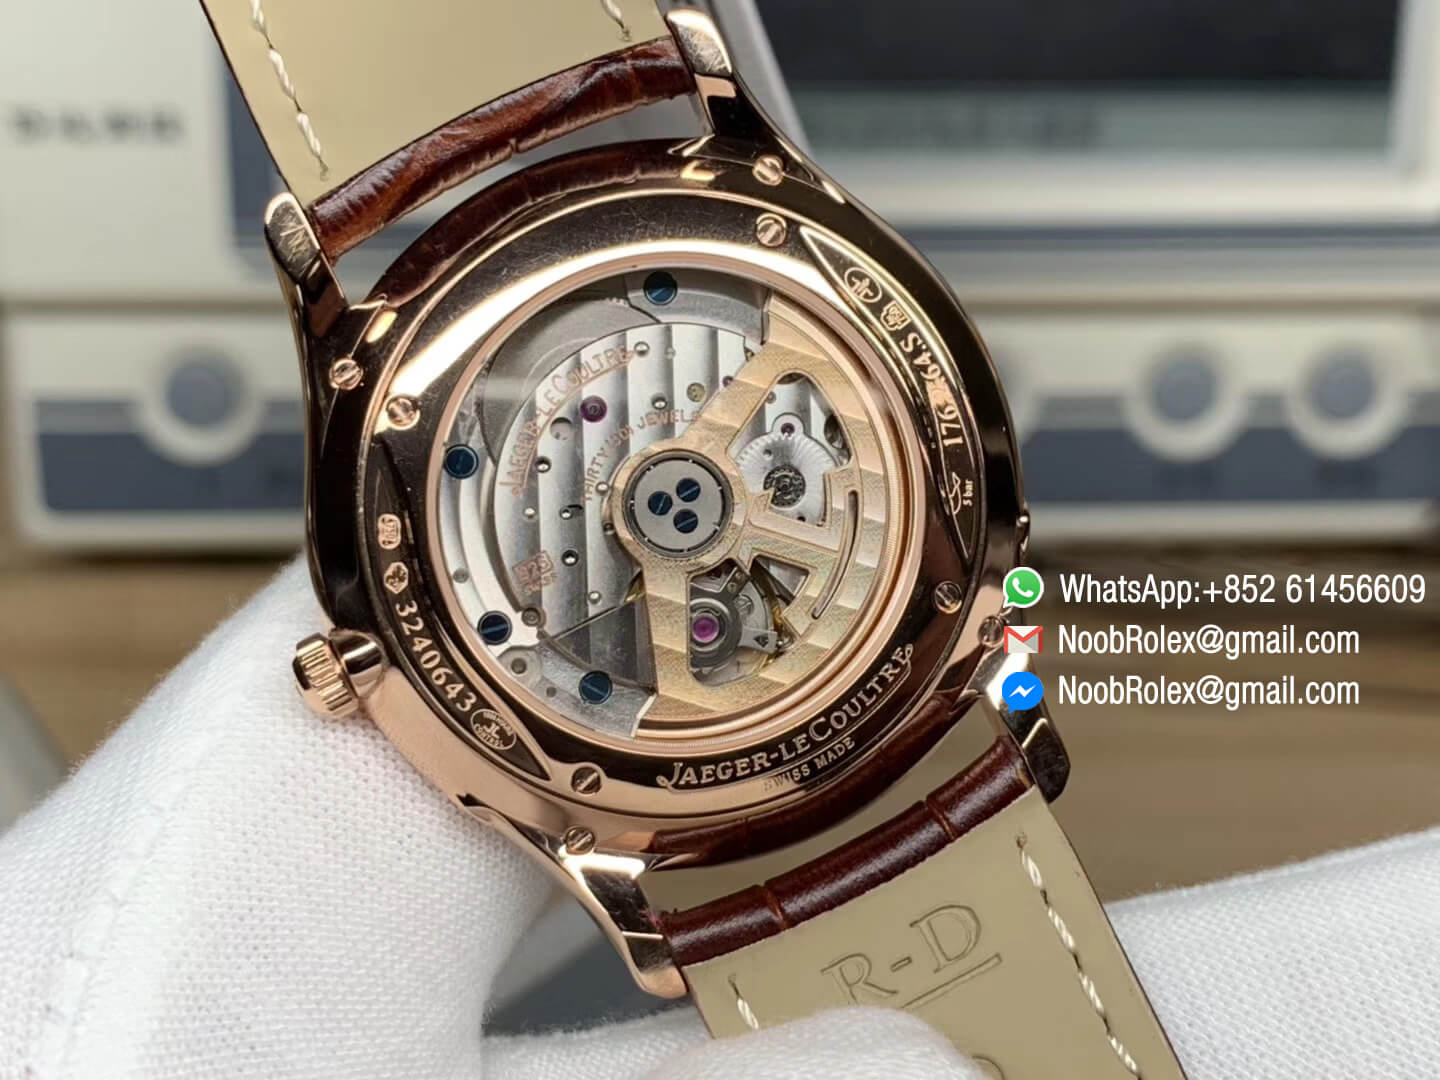 Master Ultra Thin Q1362520 ZF Best 1:1 Rep Edition Moonphase Rose Gold ...